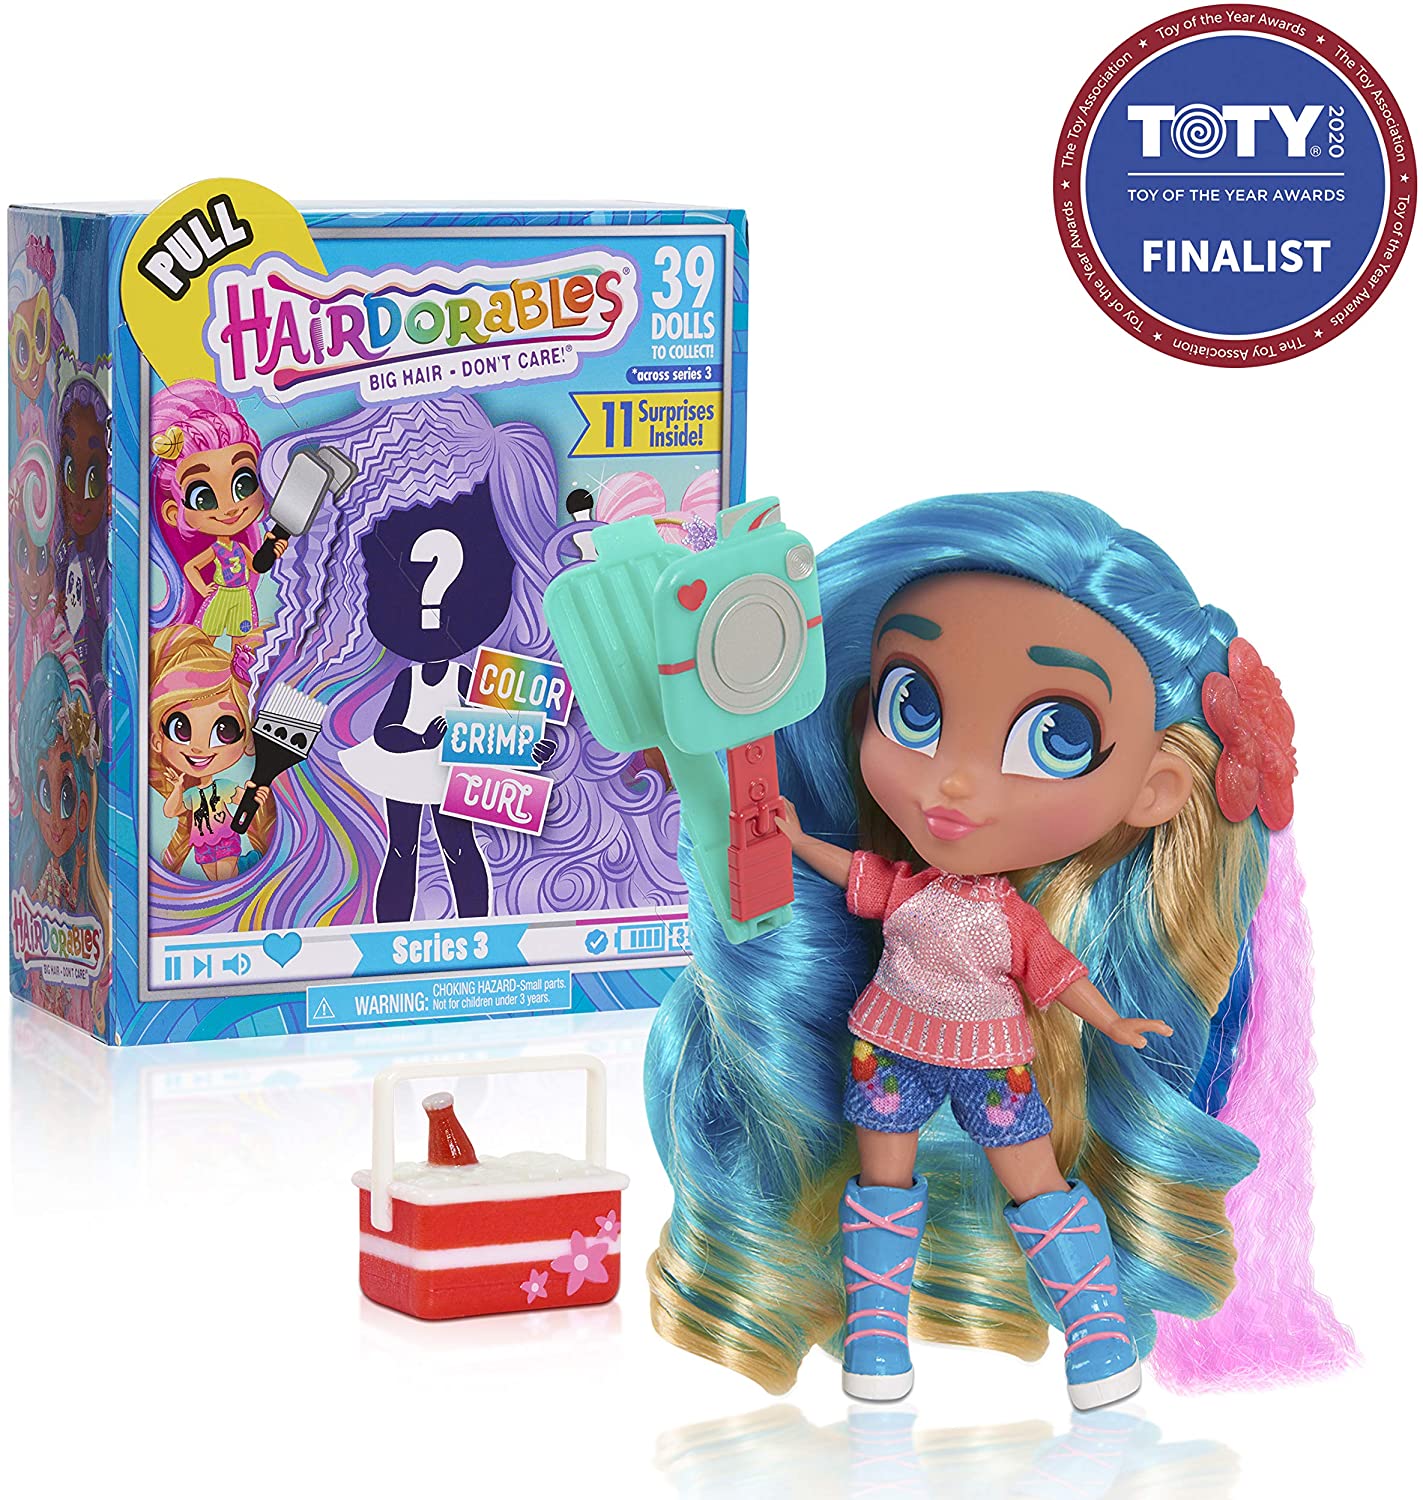 Review of Hairdorables Collectible Dolls Series 3